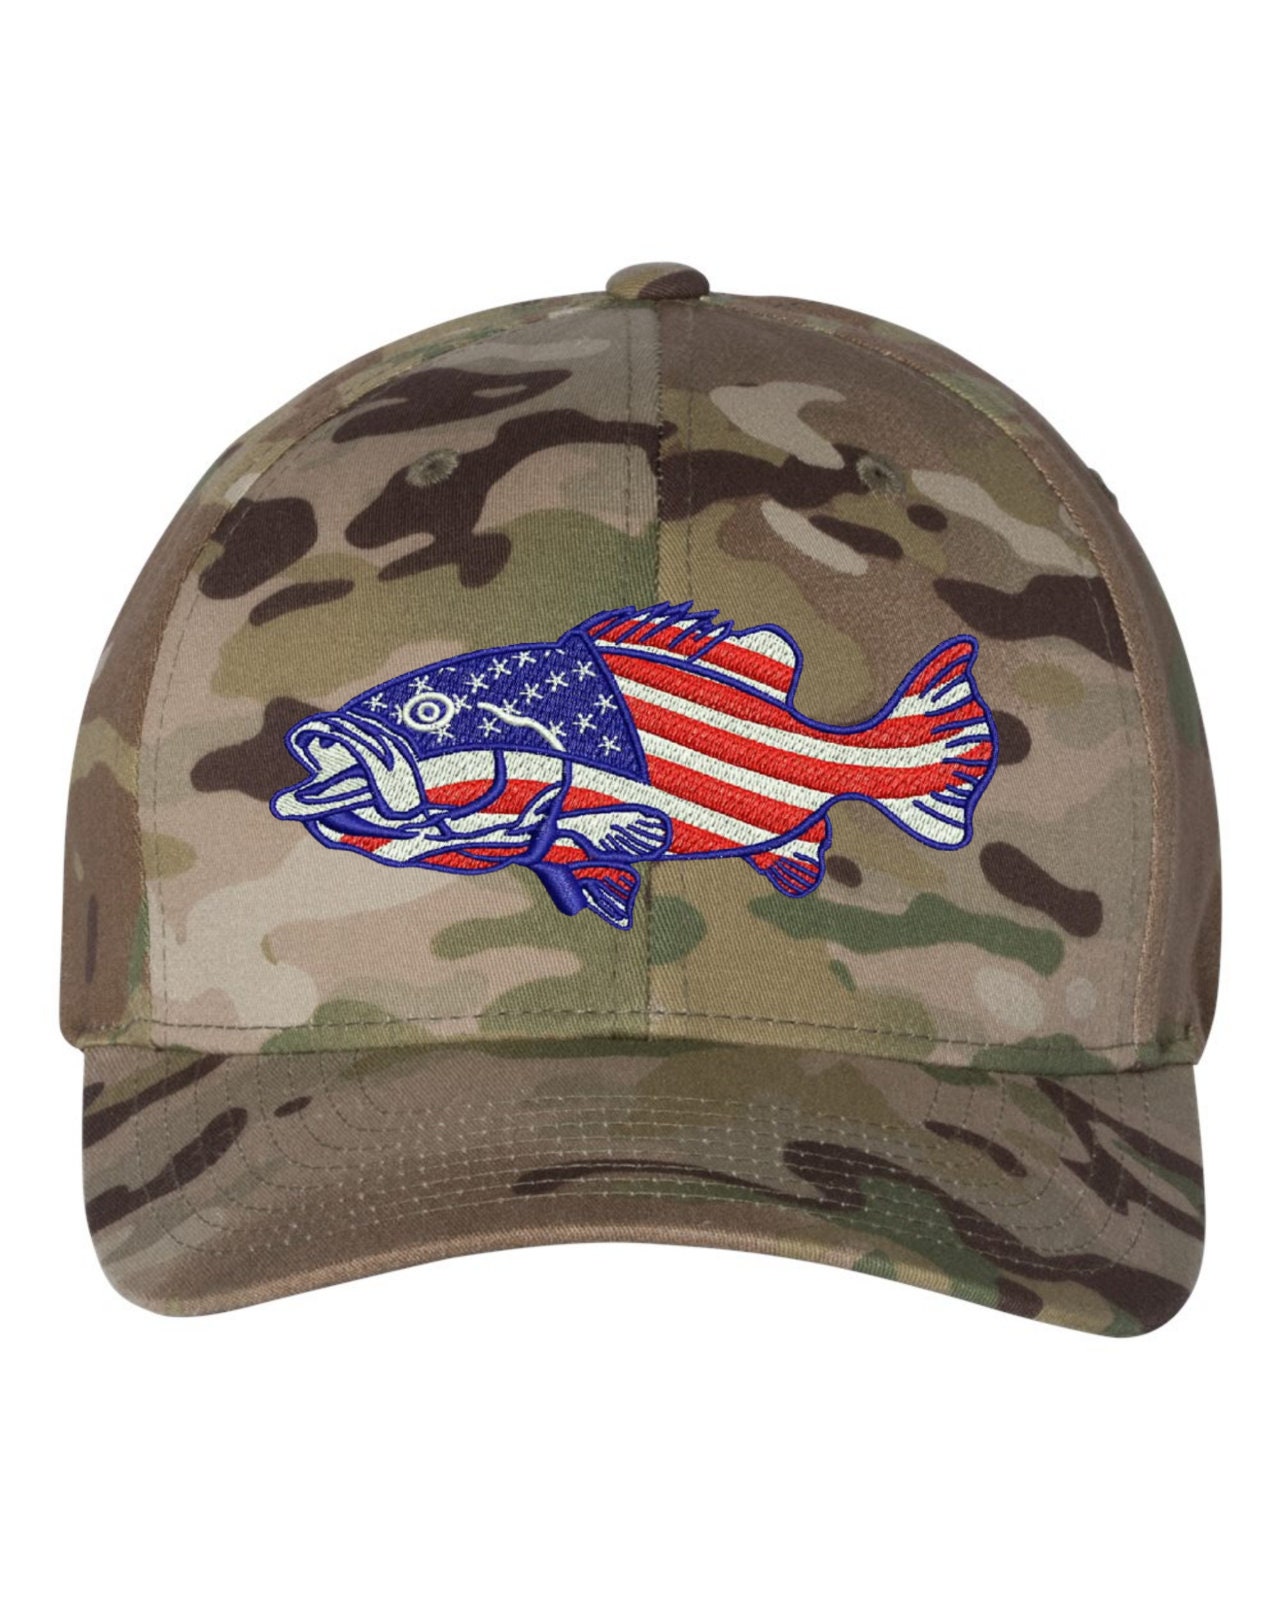 Customizable Fishing Bass Embroidered Flexfit Hat Pro American Flag Fish Cap 2 Fisherman Boat Trout Bass